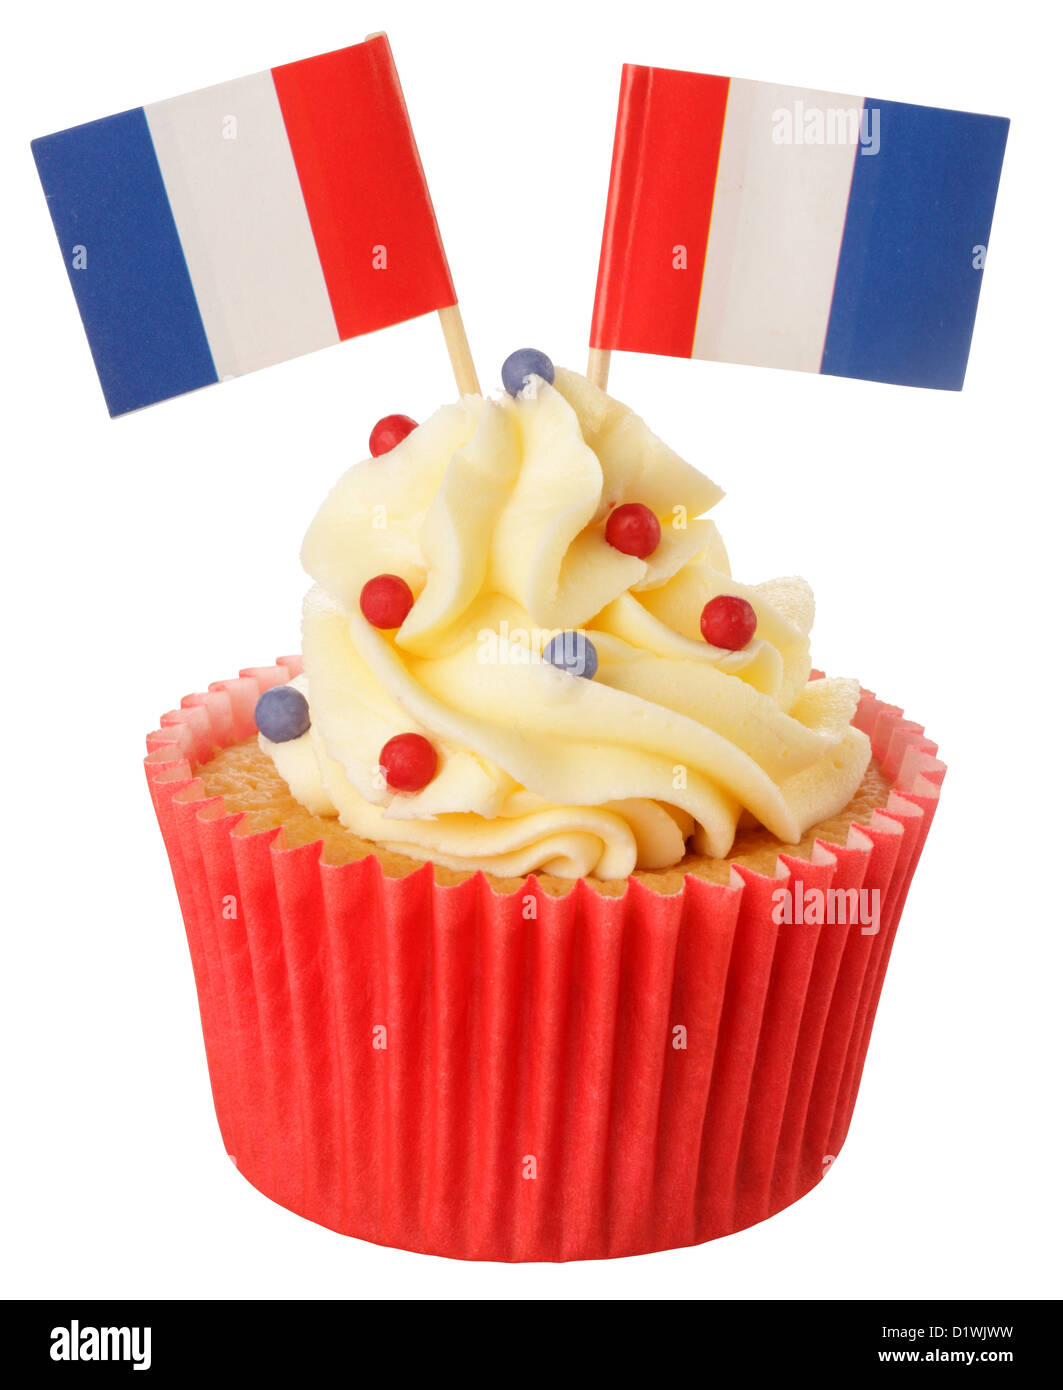 CUT OUT OF FRENCH FLAG CUPCAKE Stock Photo